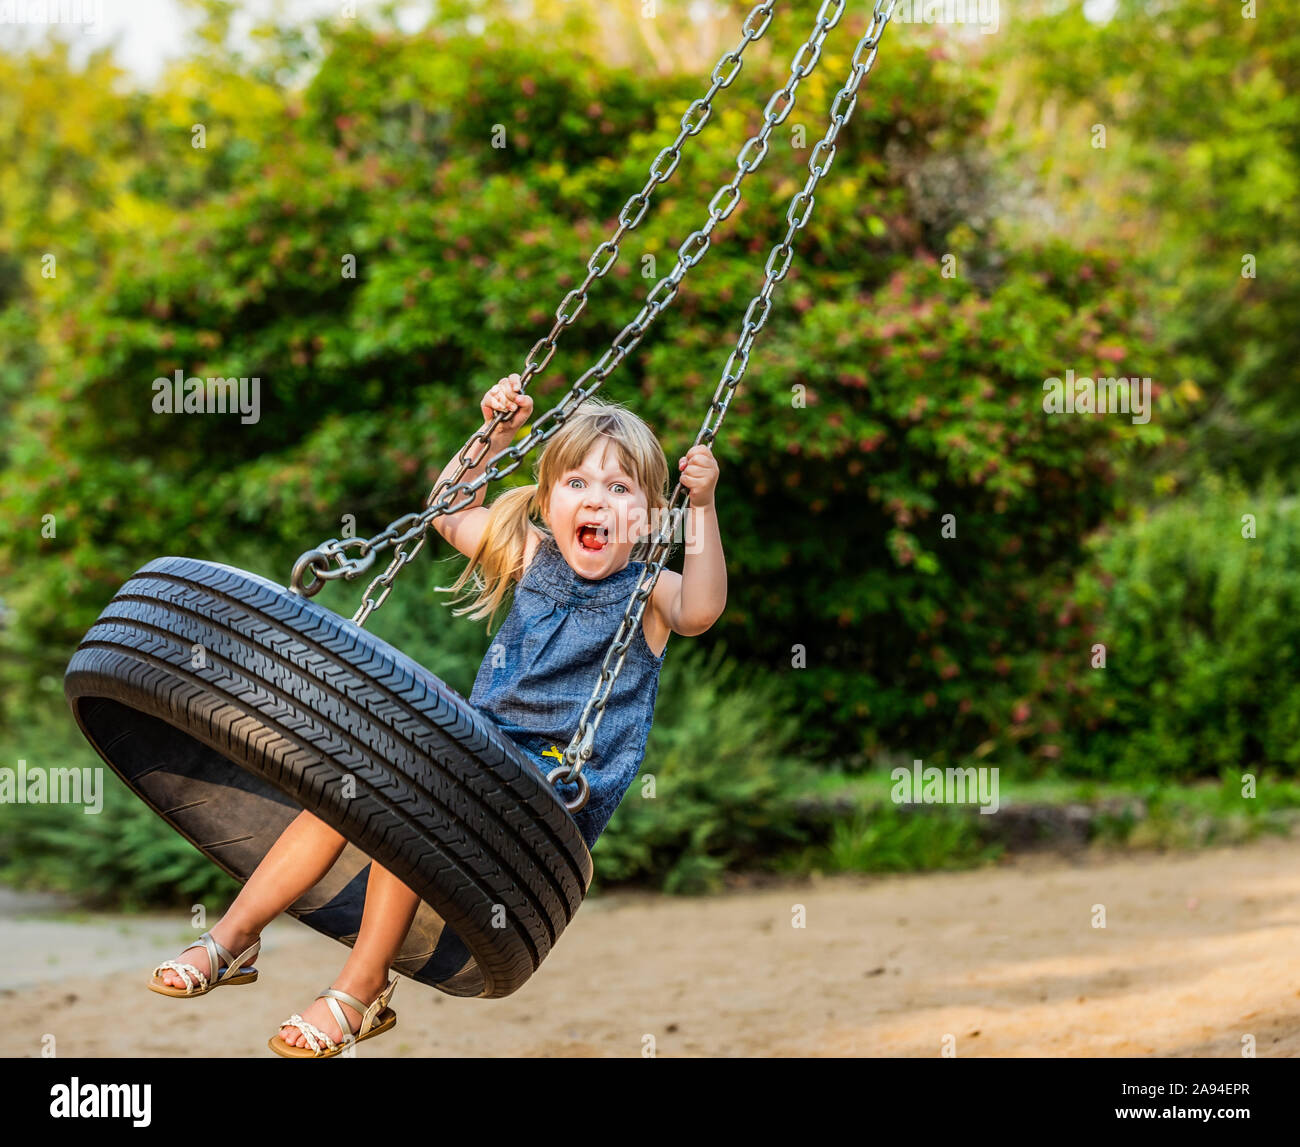 A young girl makes a silly face as she swings on a tire swing; Edmonton, Alberta, Canada Stock Photo